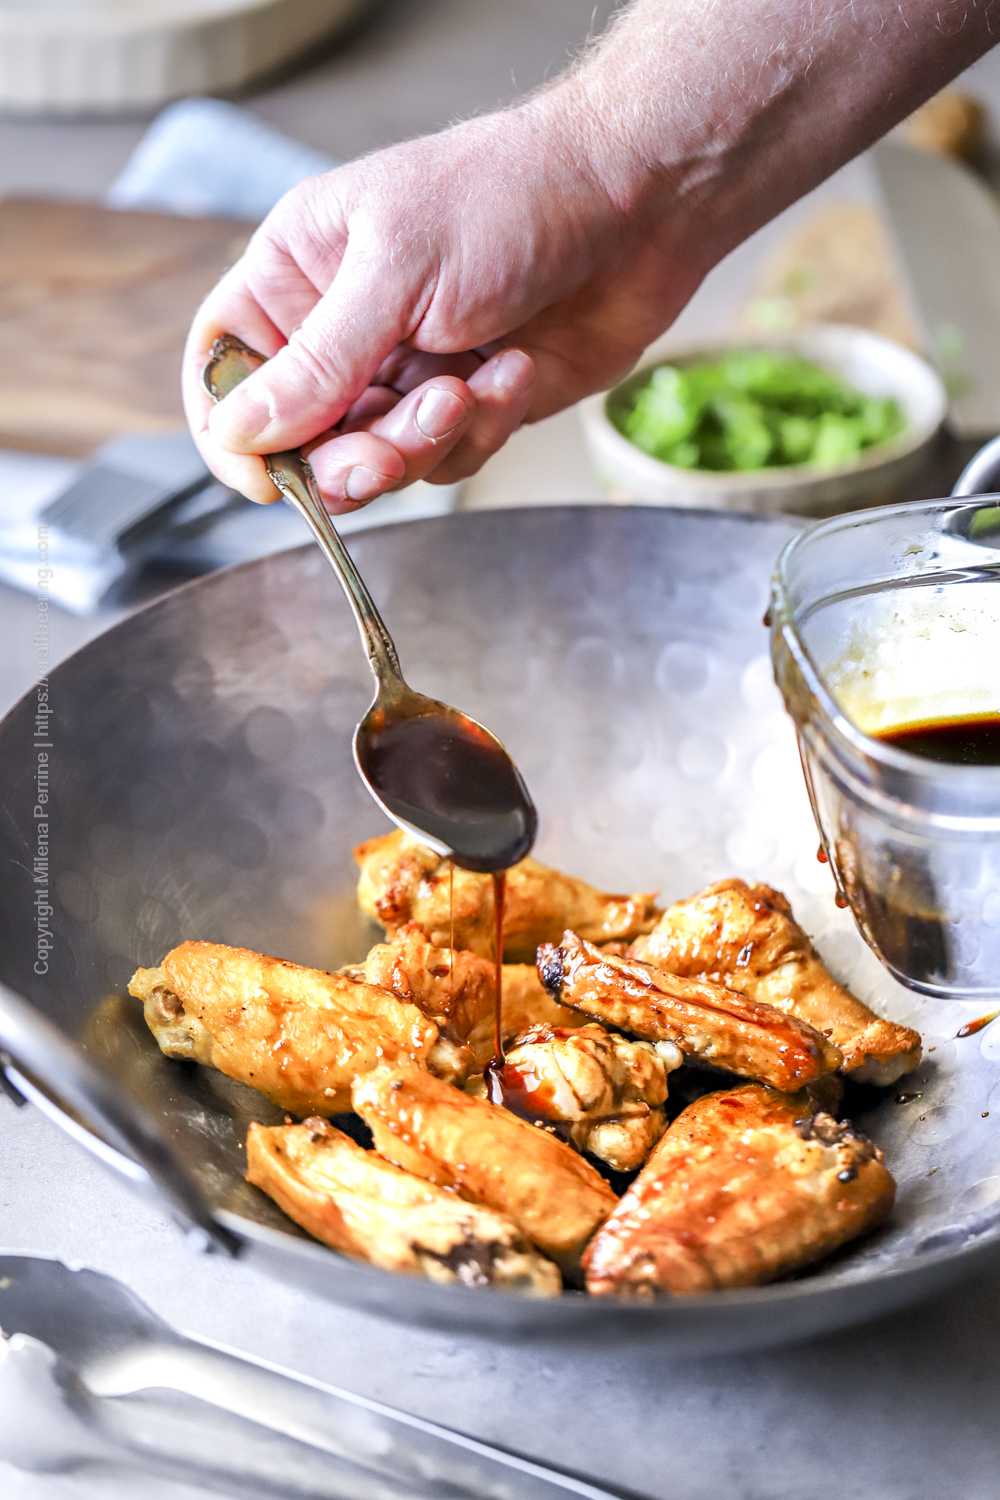 Bourbon sauce drizzled over baked chicken wings.